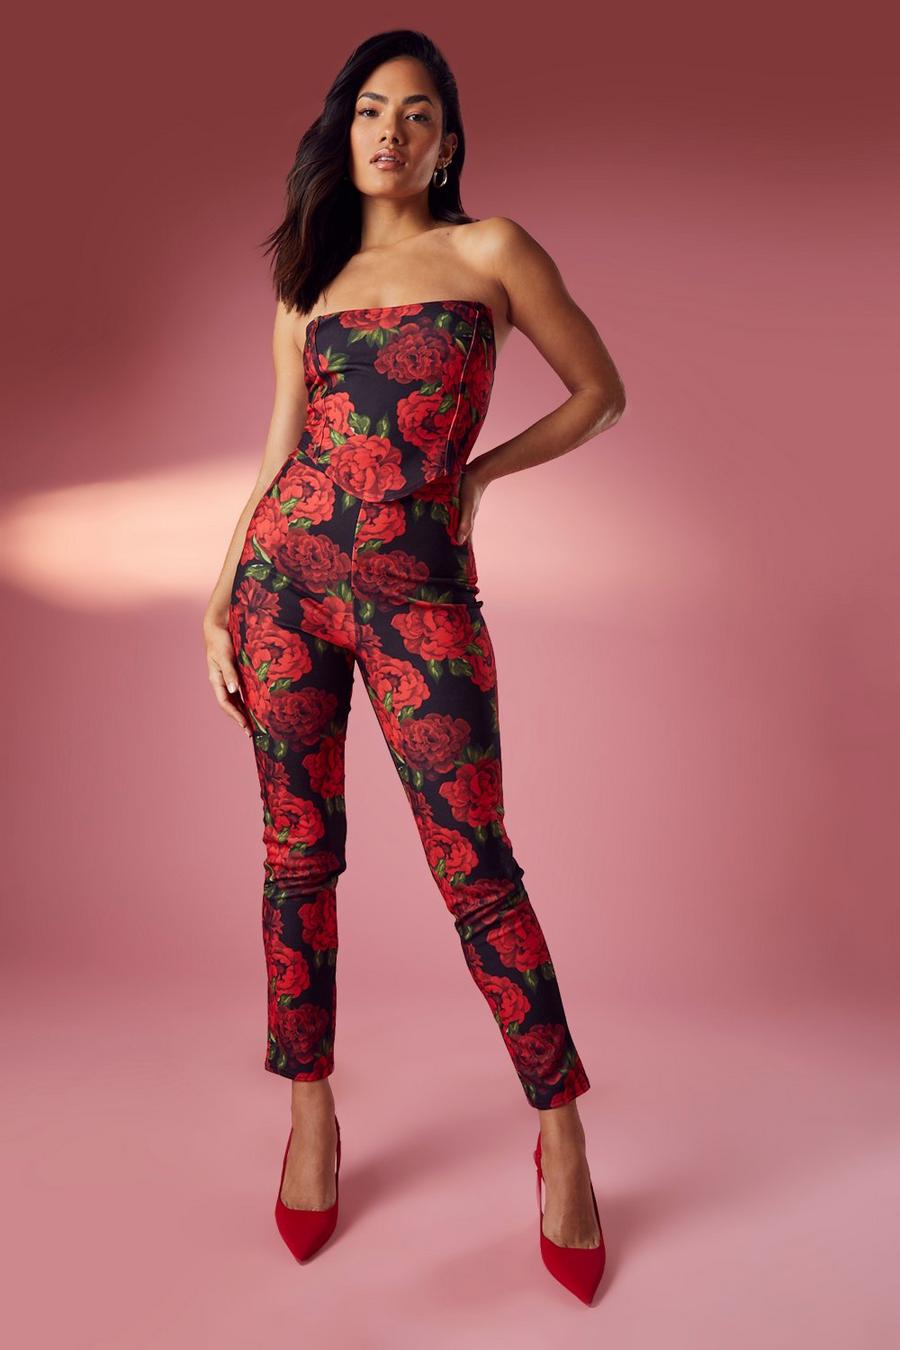 Whitive Womens Slim Fit Floral Printed Top+Long Pant Bodycon Jumpsuit